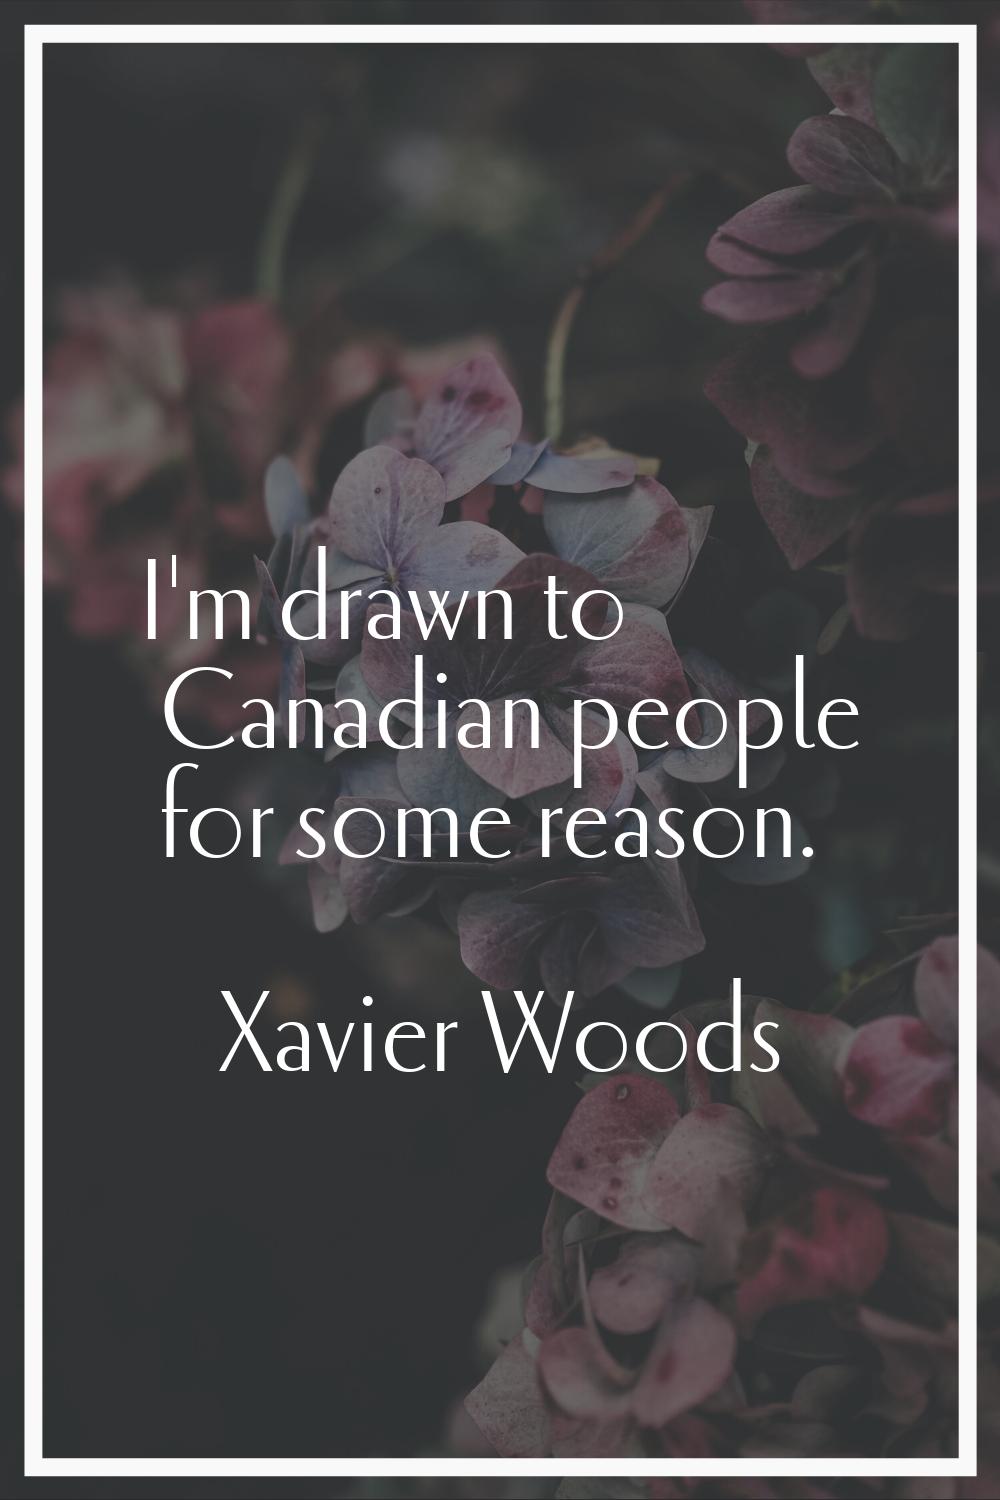 I'm drawn to Canadian people for some reason.